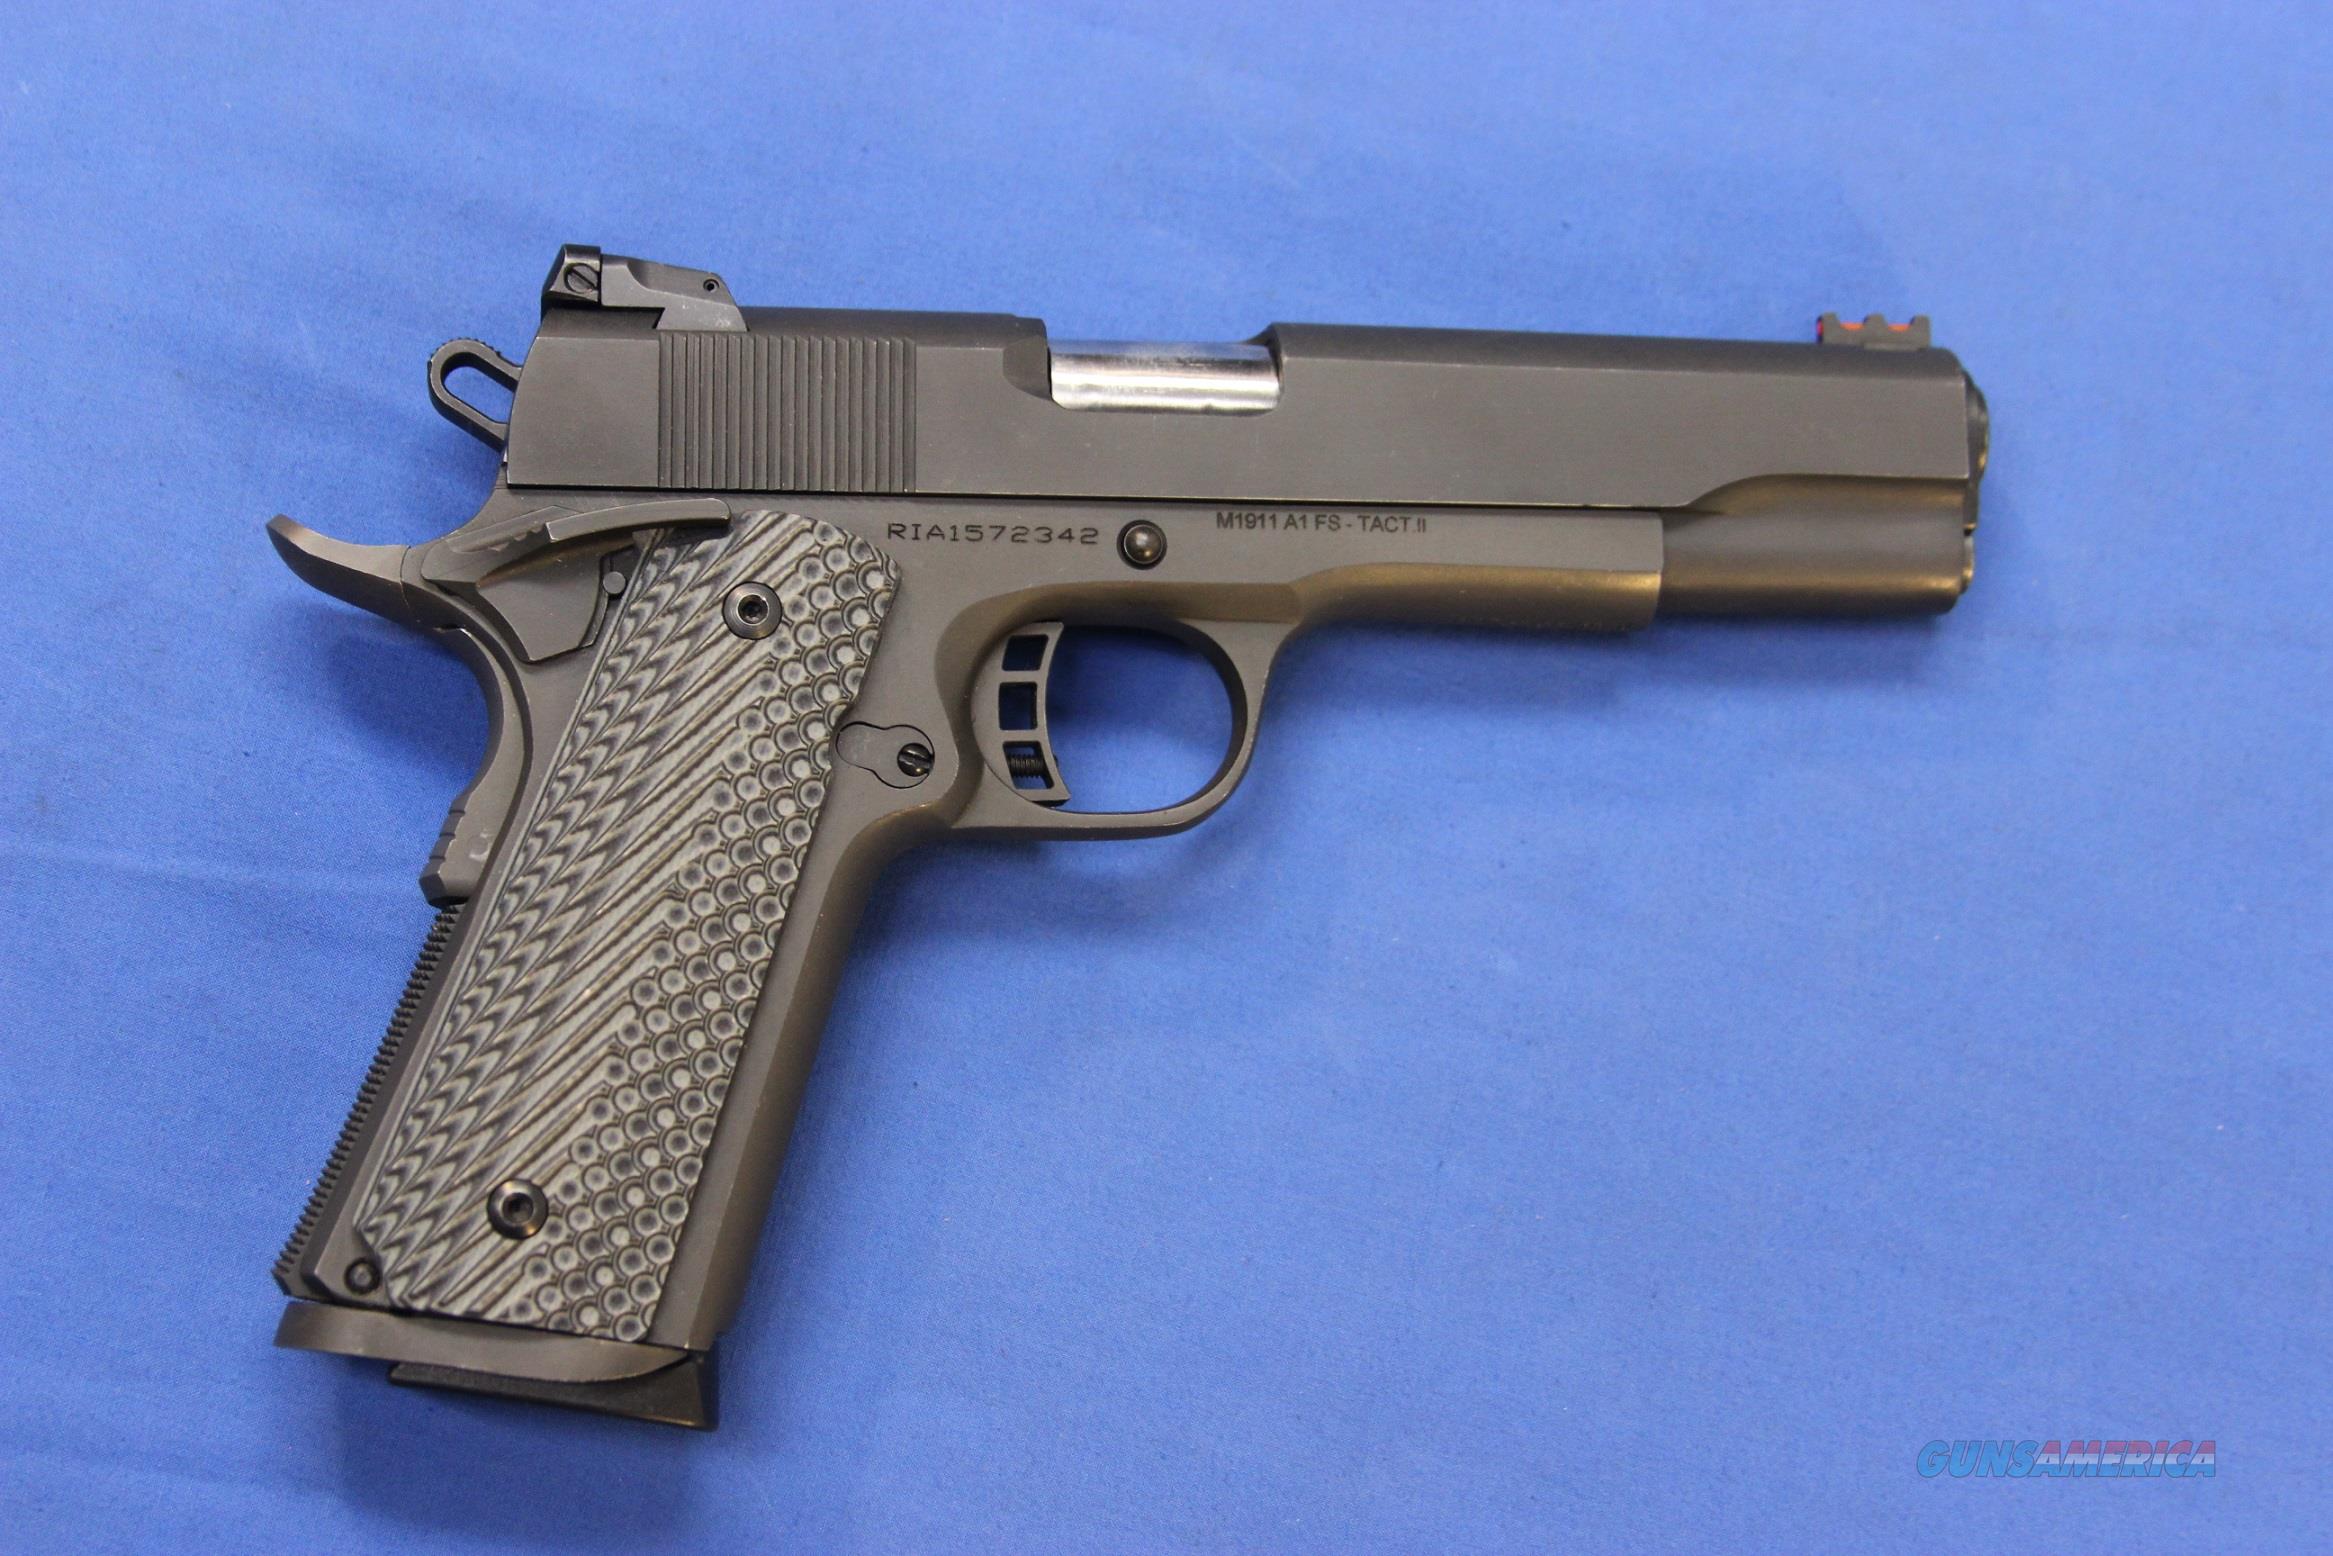 Rock Island Armory 1911 A1 Fs Tacti For Sale At 955747398 7612